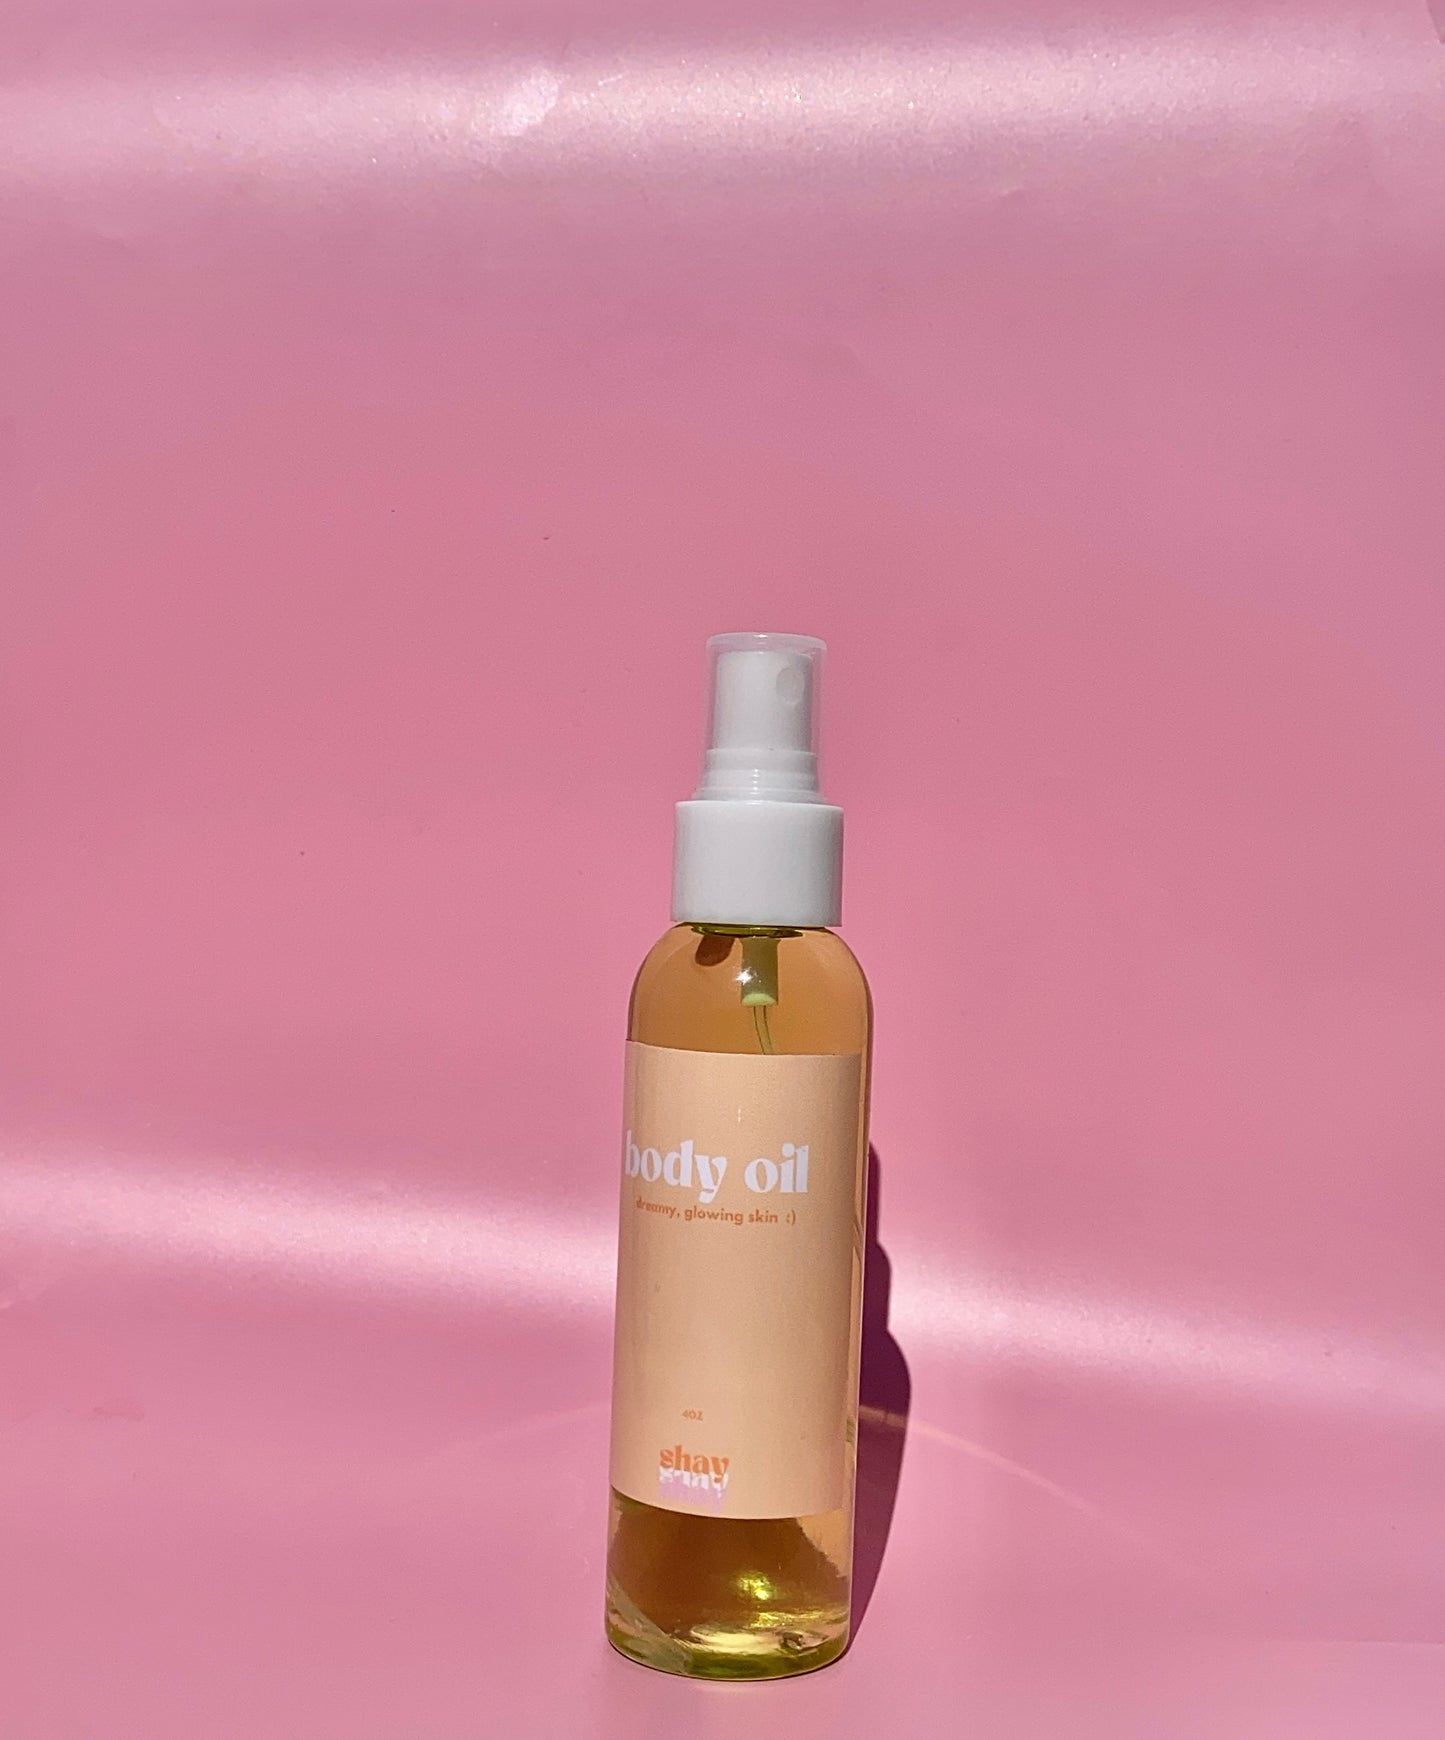 chocolate chip cookie dough body oil